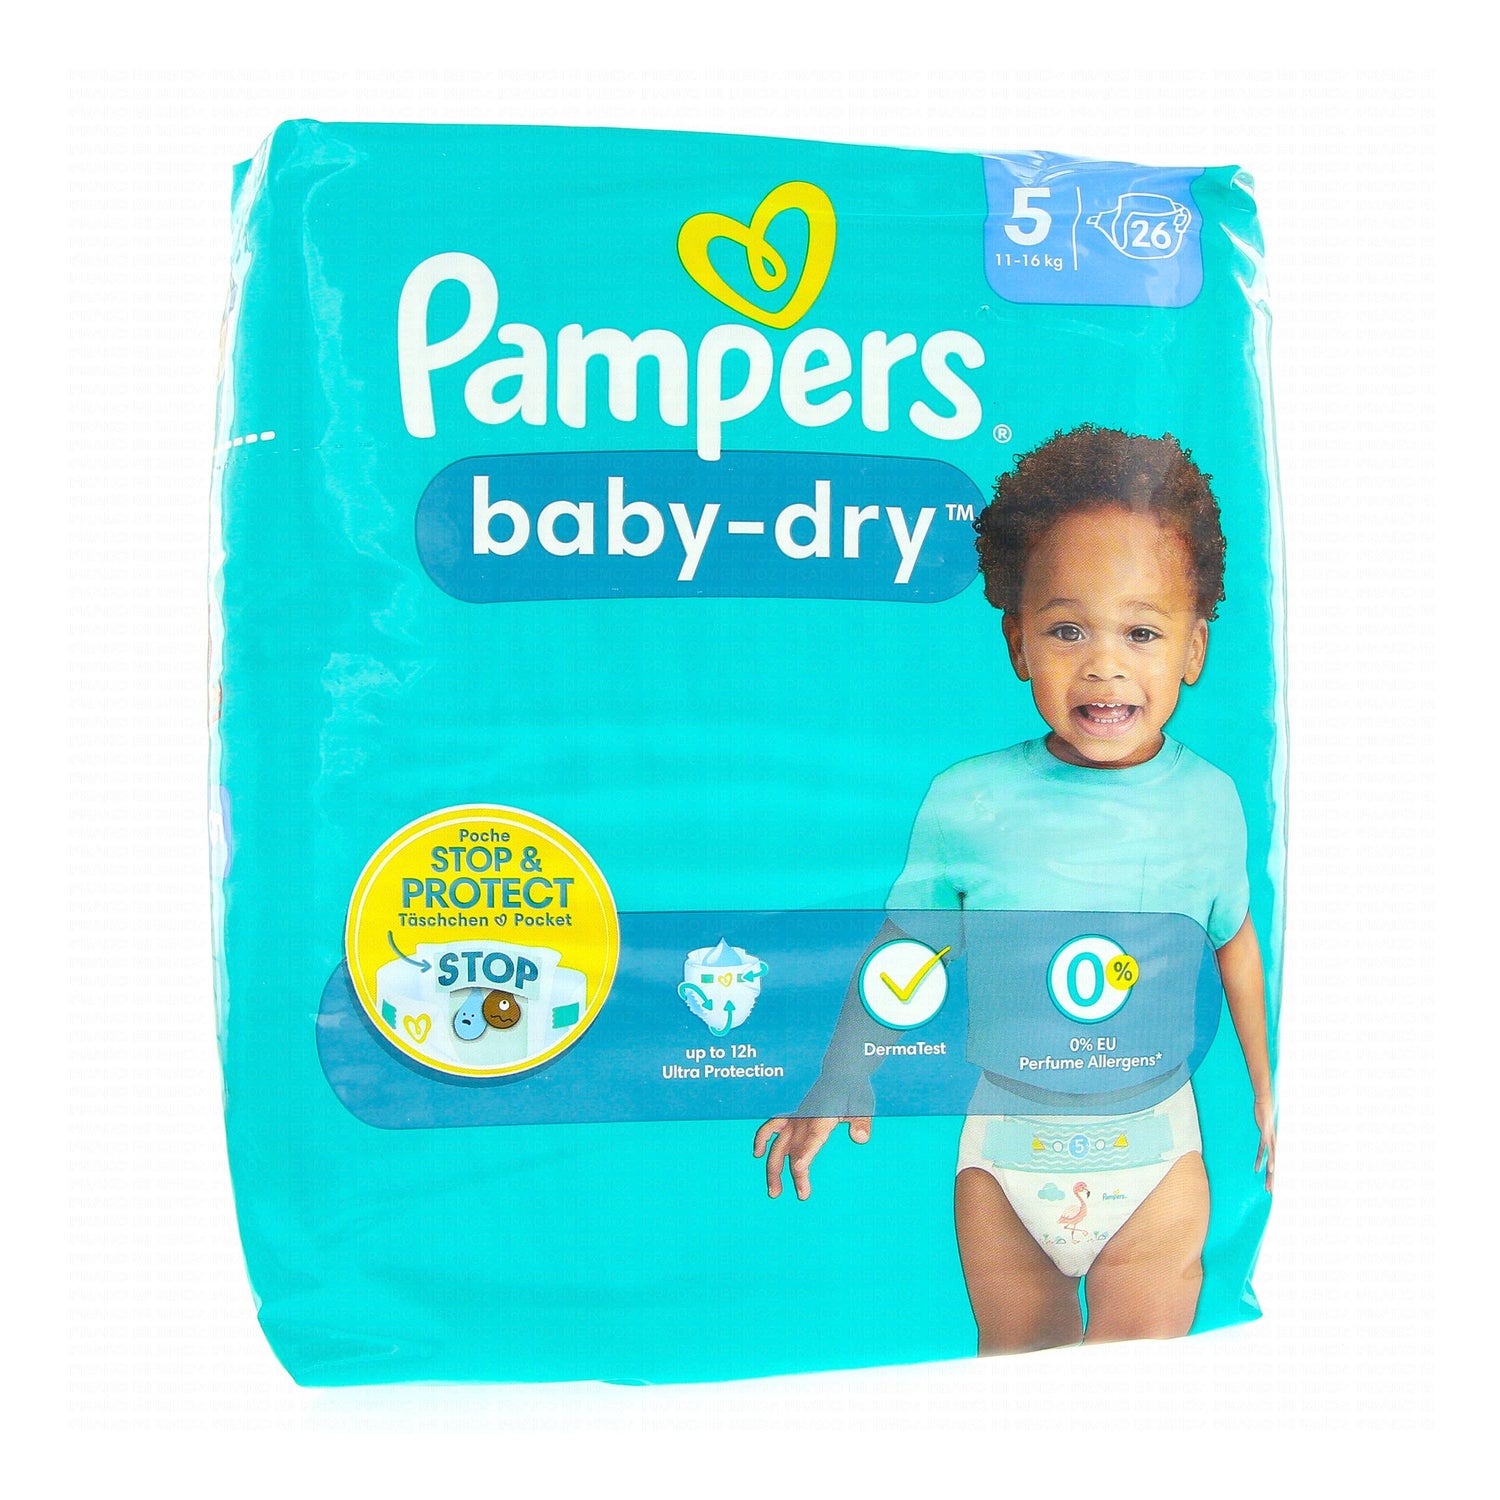  Pampers Premium Care Micro (1 - 2.5kg) 30 Diapers